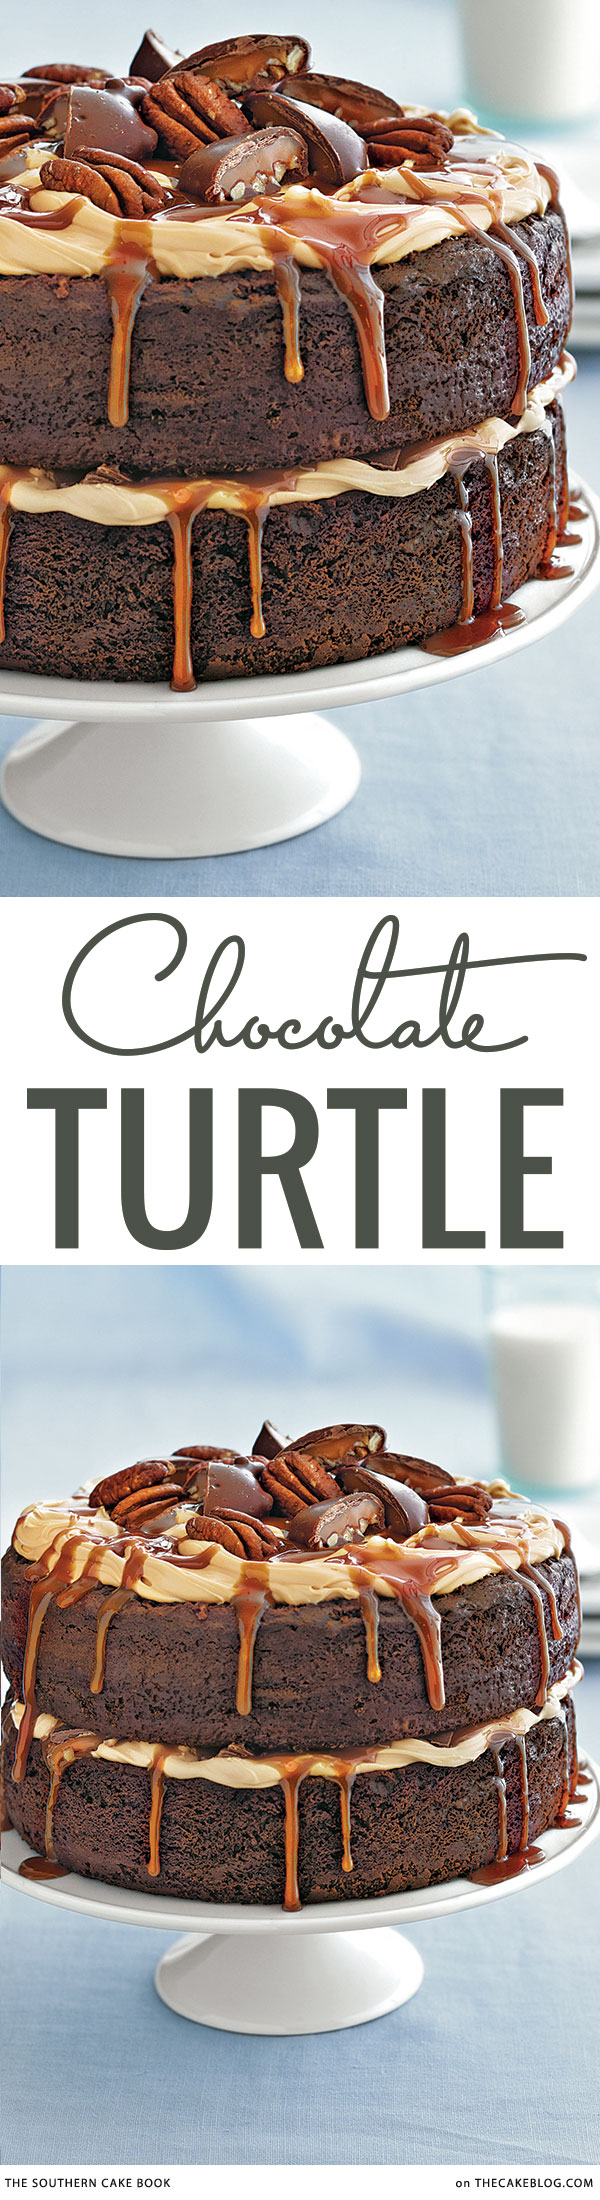 Chocolate Turtle Cake Recipe | from The Southern Cake Book by Southern Living on TheCakeBlog.com